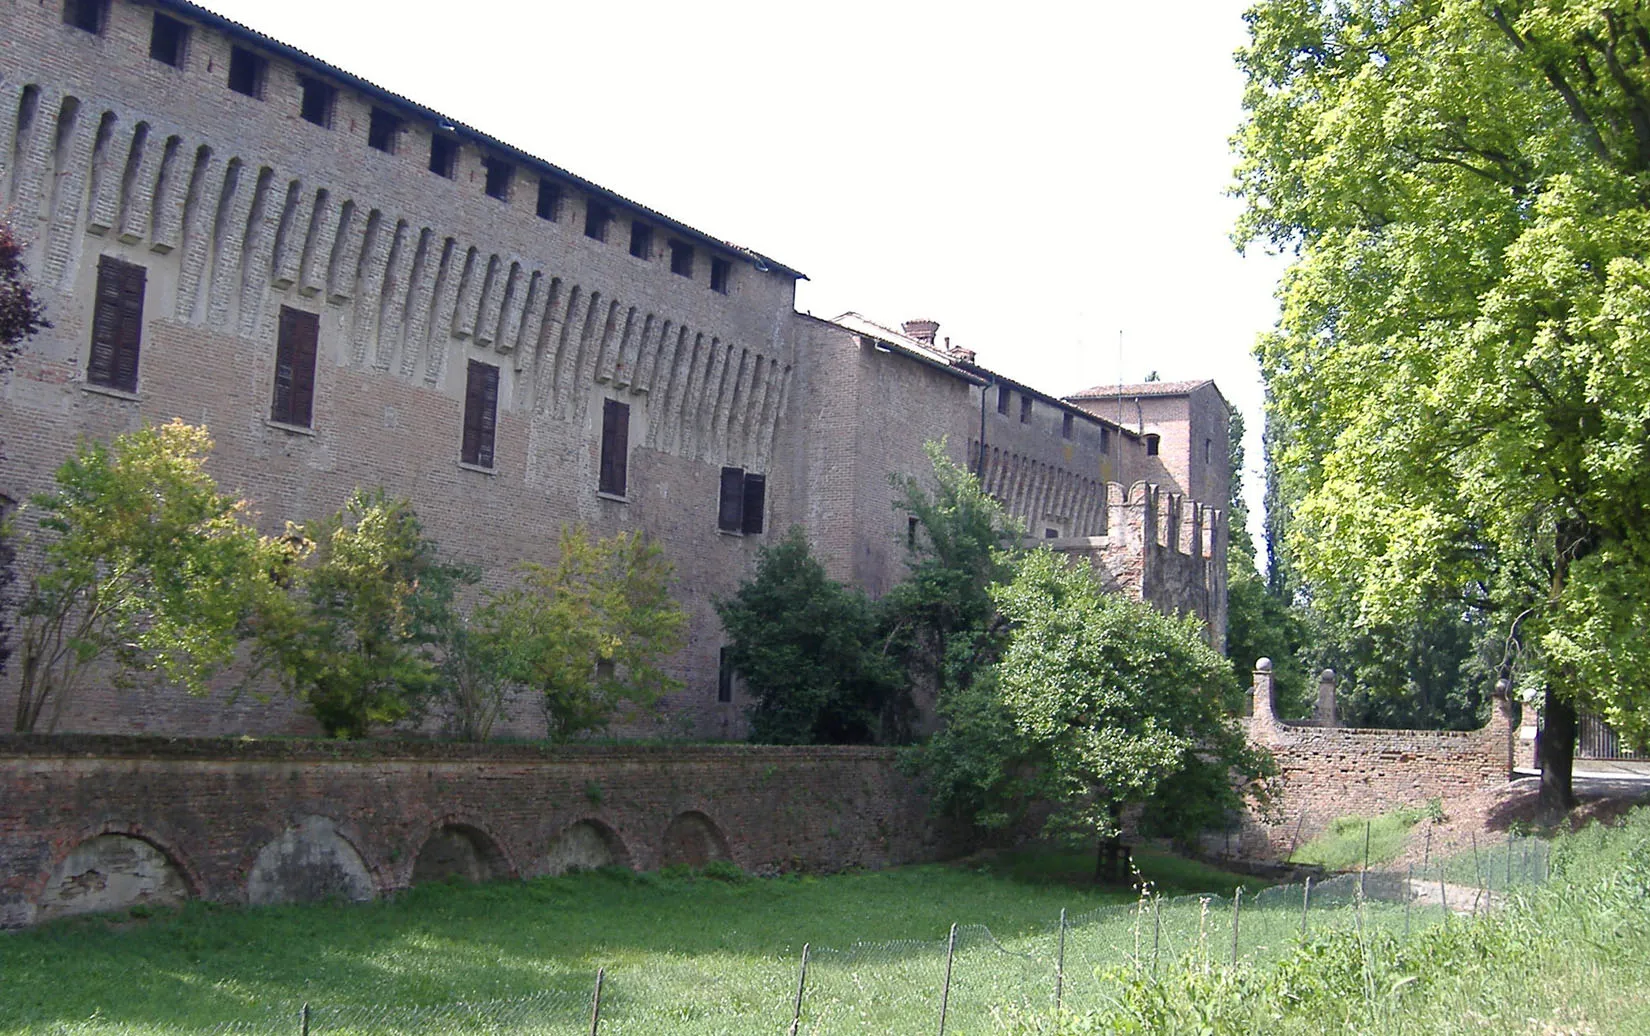 Photo showing: The castle of Maccastorna, Italy